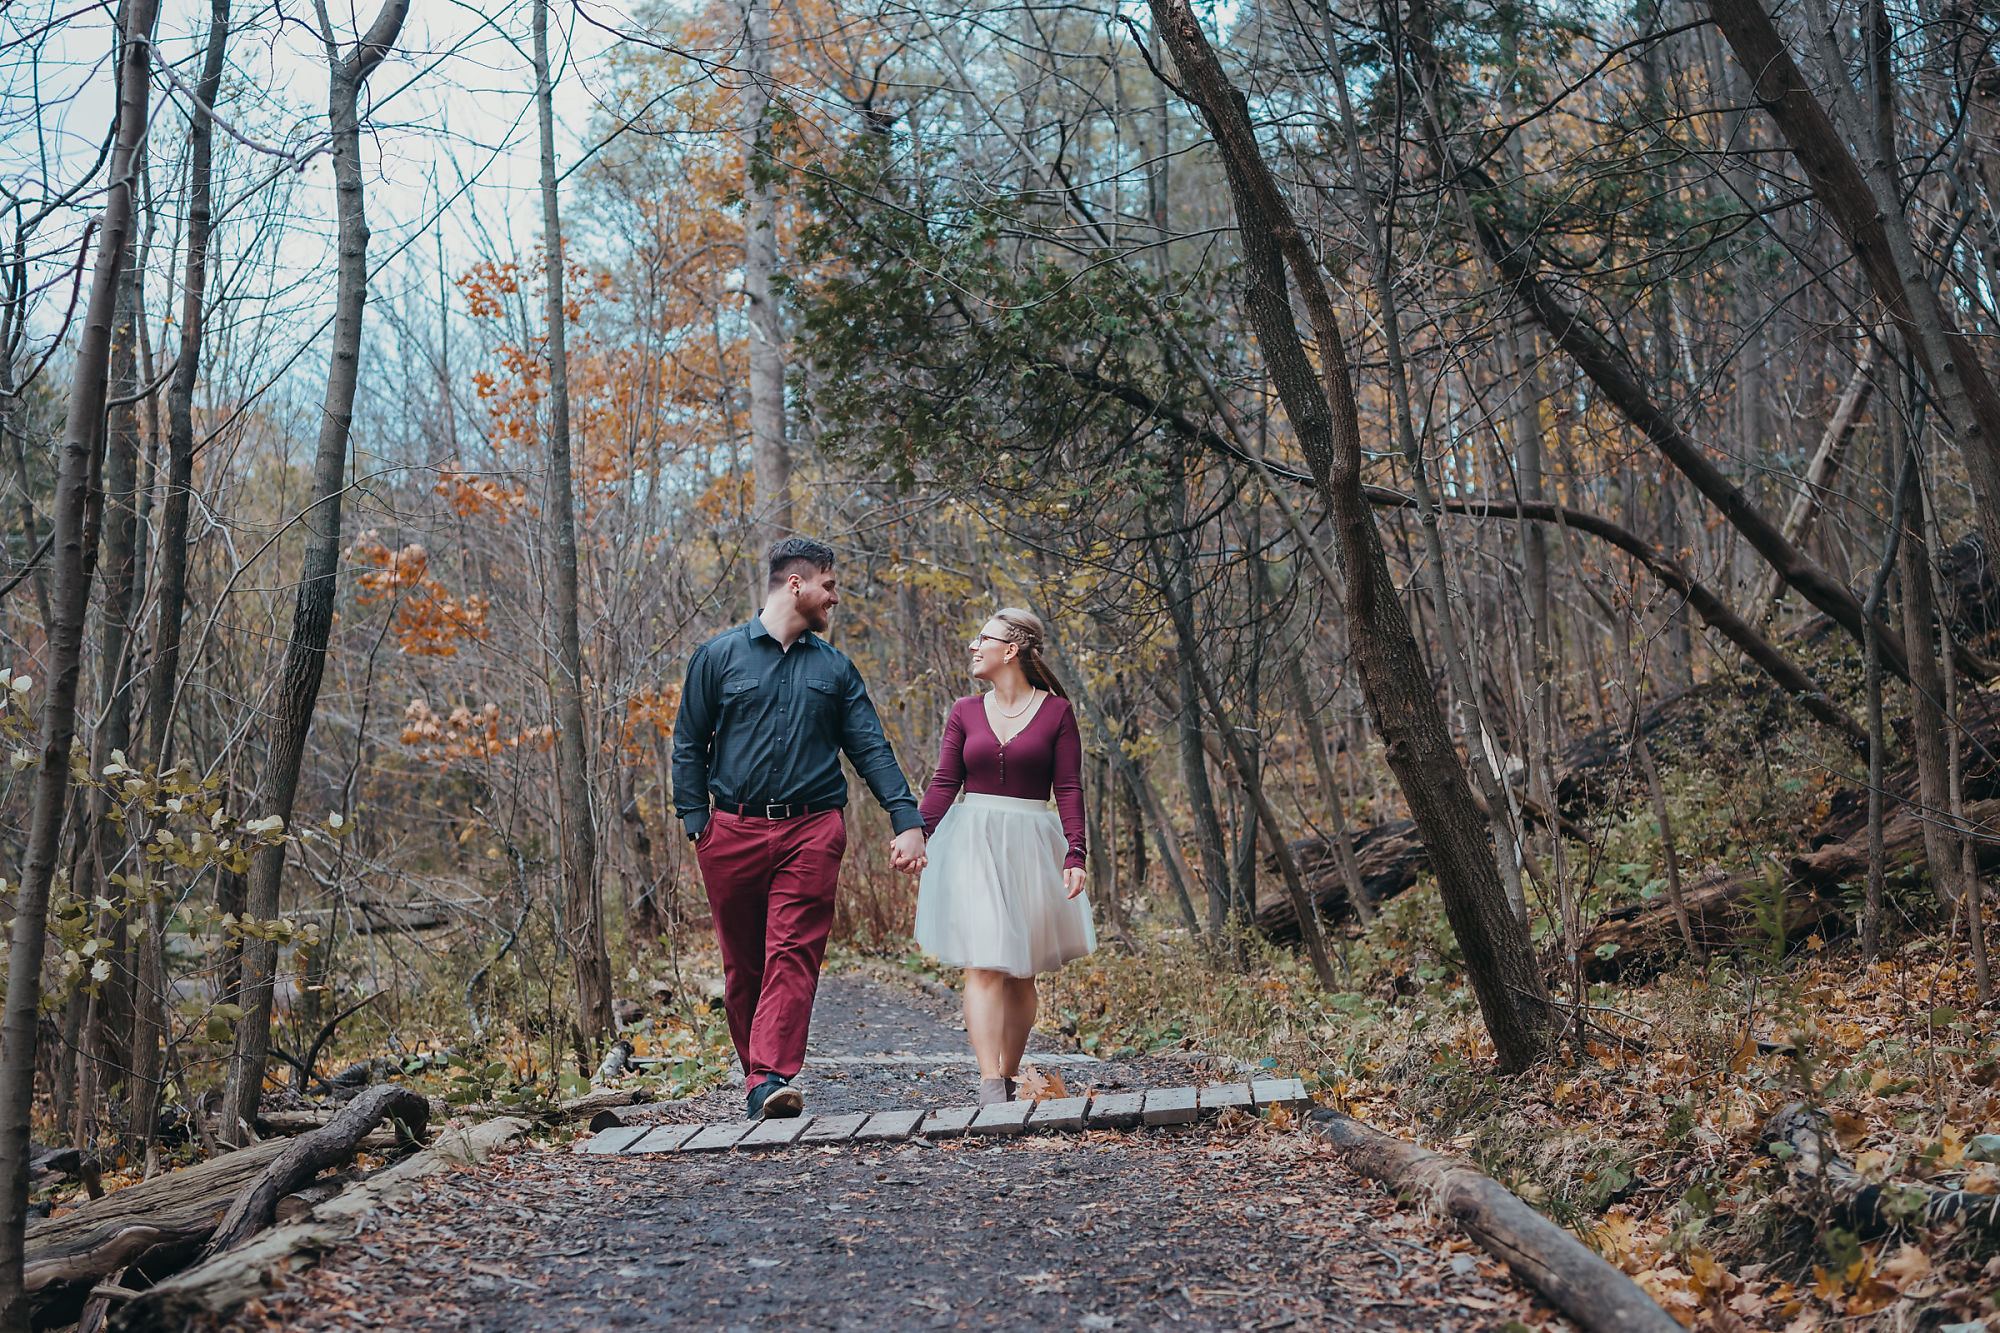 Dan and Nina holding hands during a walk in the forest near Smokey Hollow Falls during their engagement session with Dundas engagement photographer Jennifer Blaak.